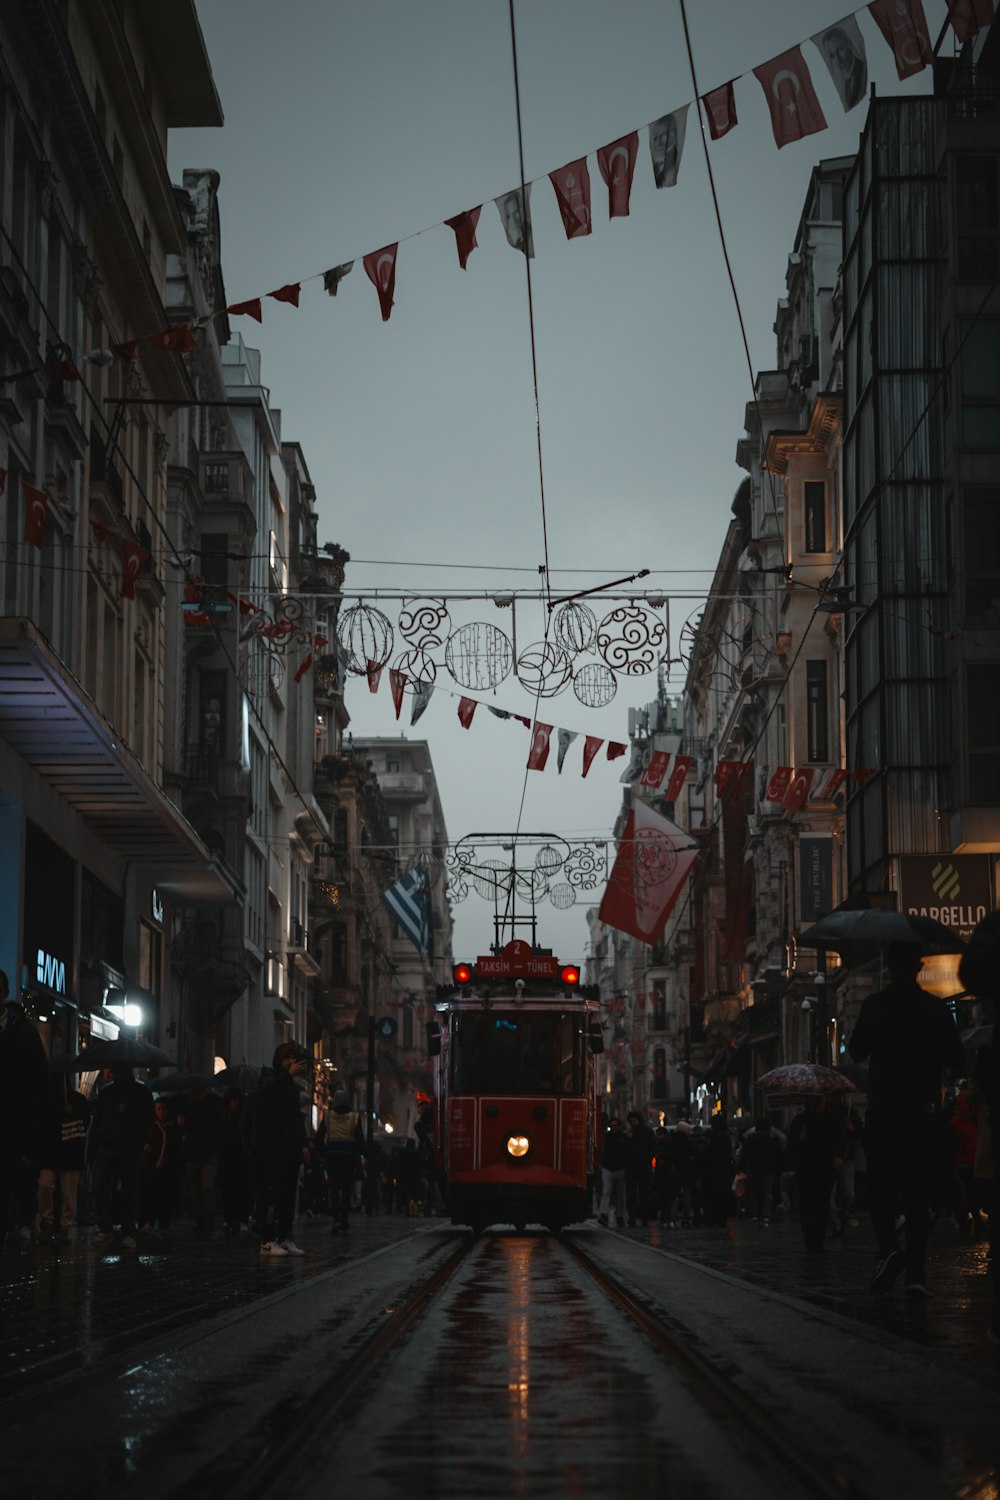 a red trolley on a city street at night